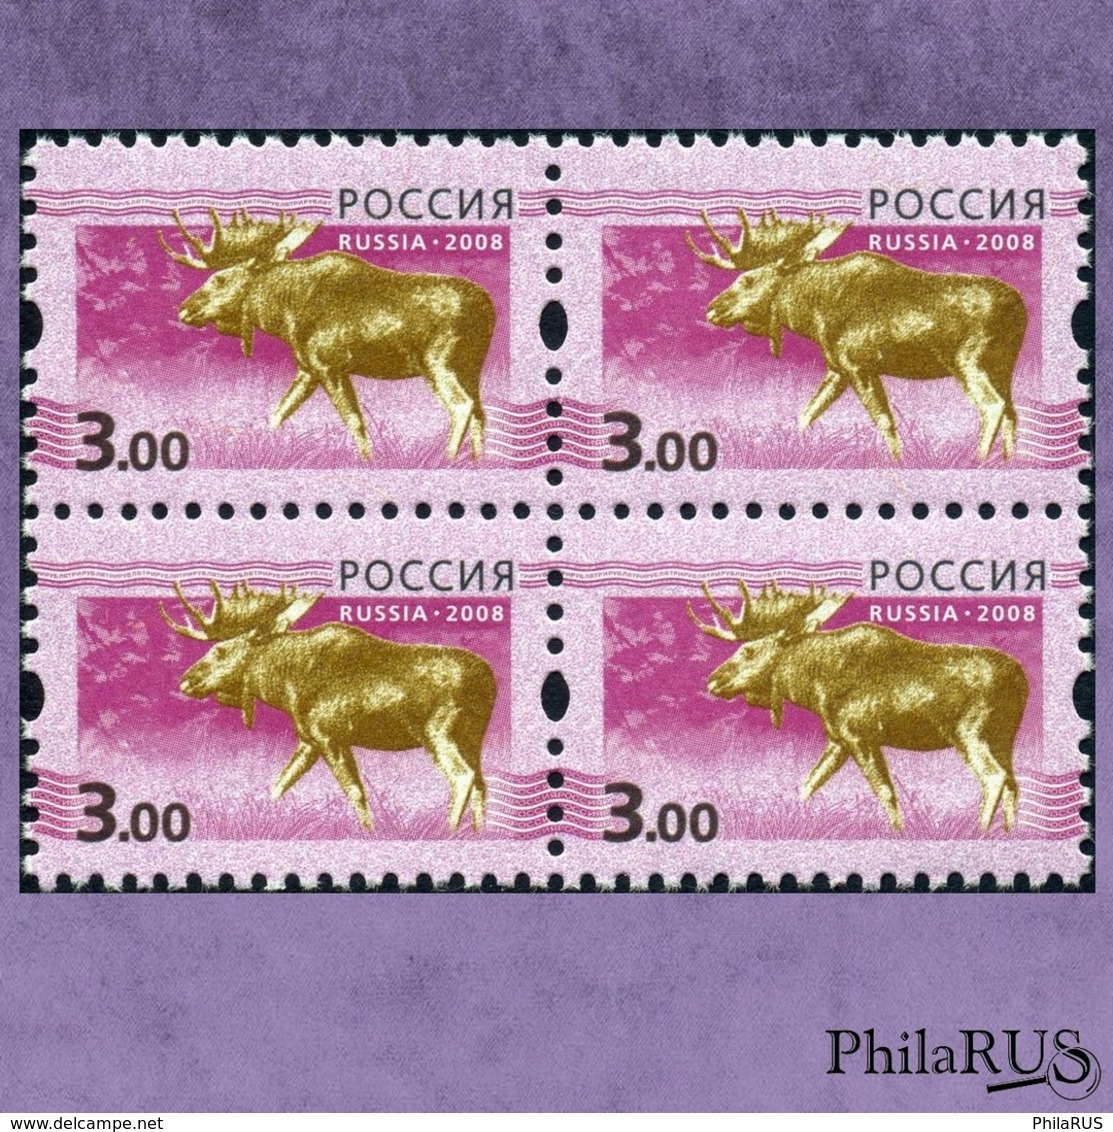 RARE! RUSSIA 2008(2010?) Mi.1491 5th Definitive Issue Fauna Elk 3-00 ERROR! -> Without Protect Line / Bl. Of 4 - Errors & Oddities